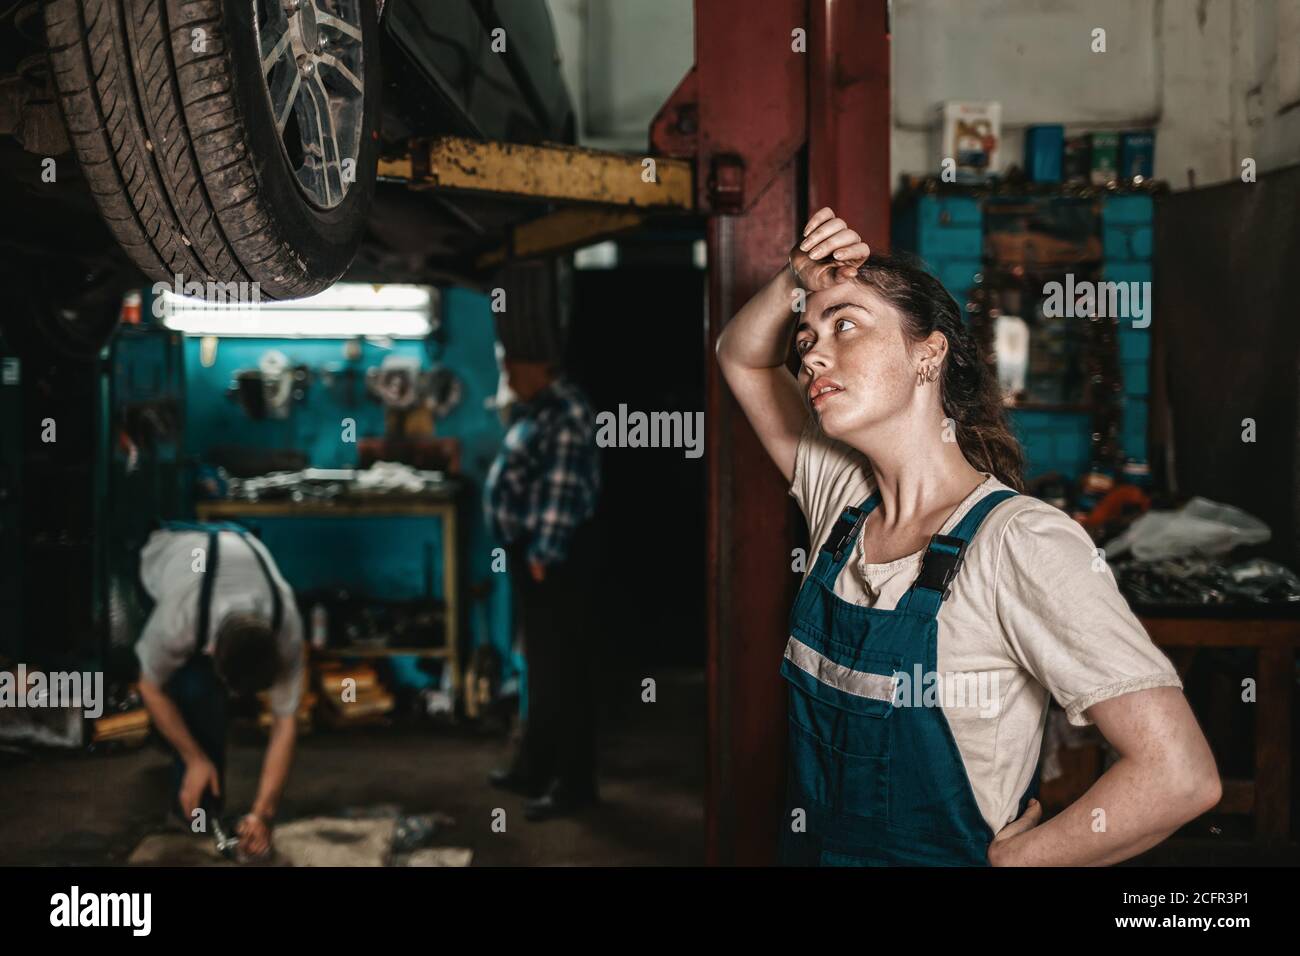 The concept of small business, feminism and women's equality. A young female auto mechanic wearily wipes sweat from her forehead. Stock Photo